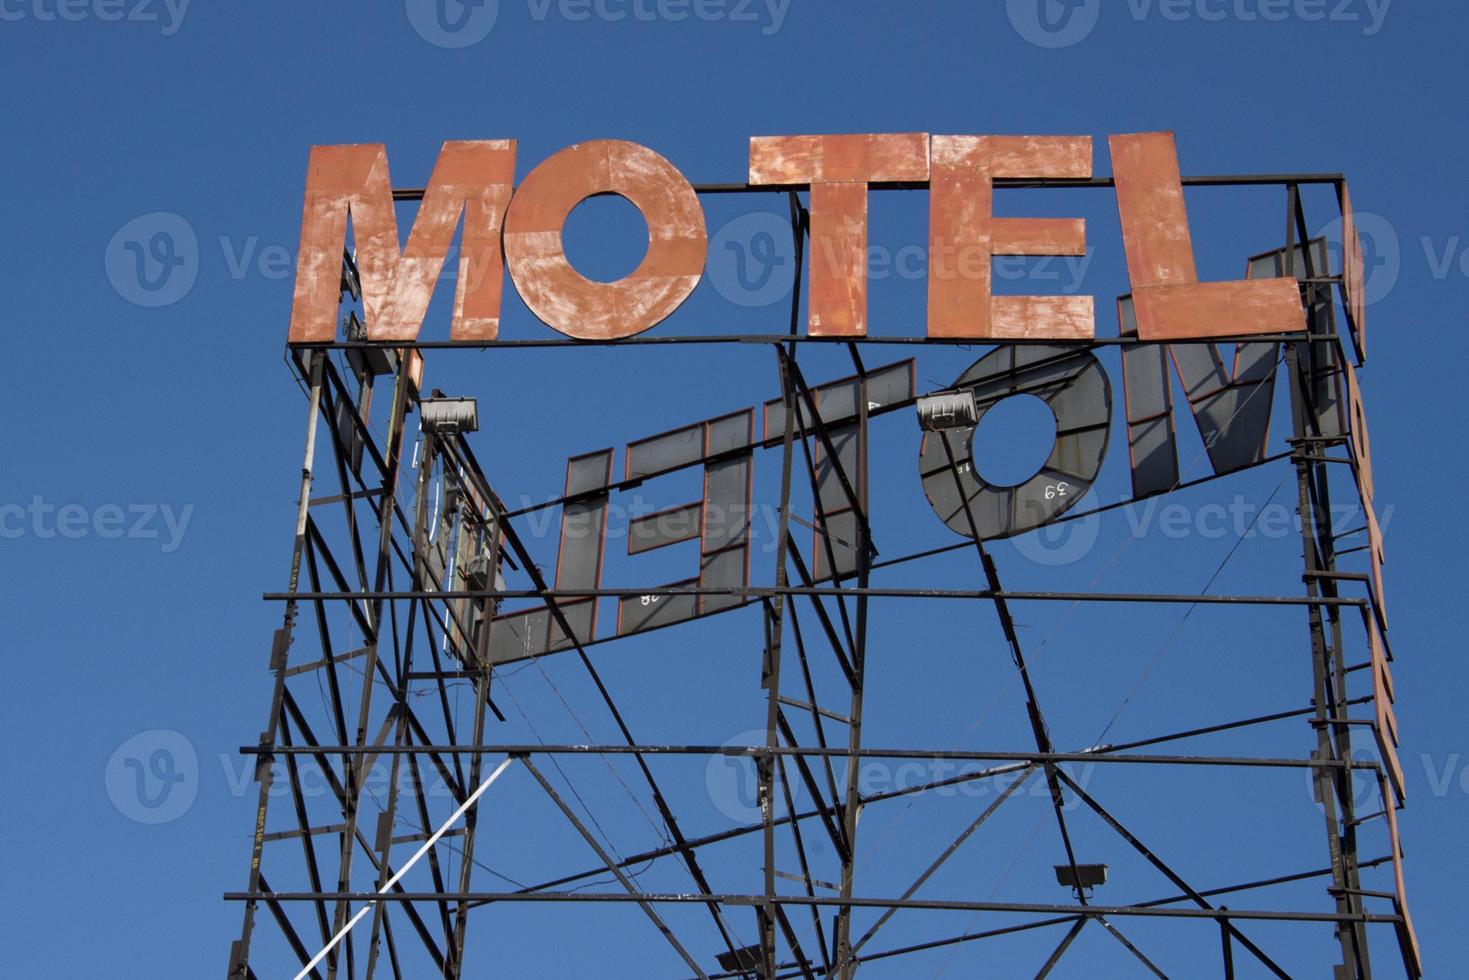 motel rusted sign on blue sky background photo